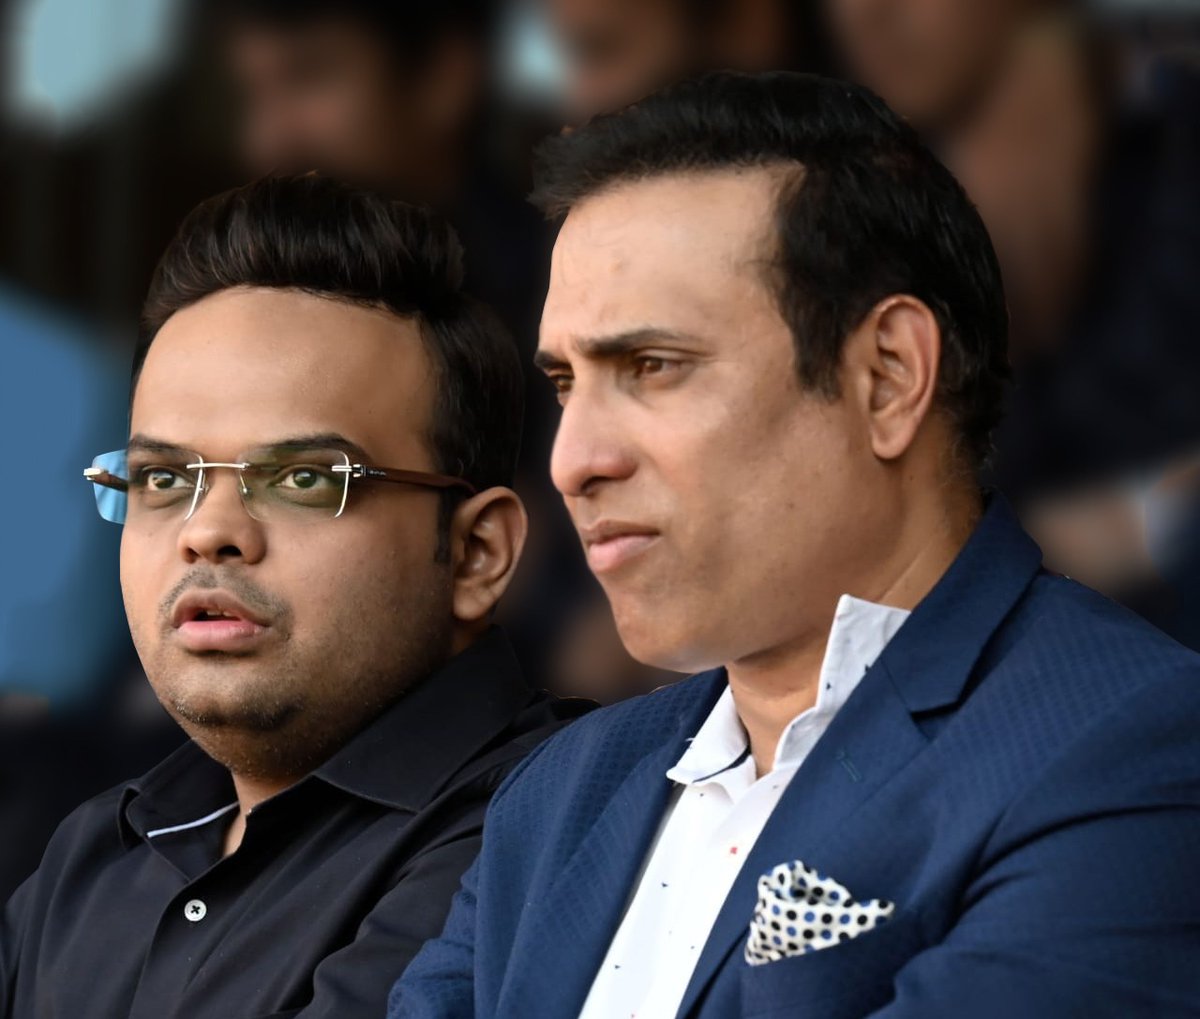 Happy birthday to the man who made millions to fall in love with test cricket! He set a benchmark and continues to inspire many even today. Have a great day and year ahead @VVSLaxman281 !